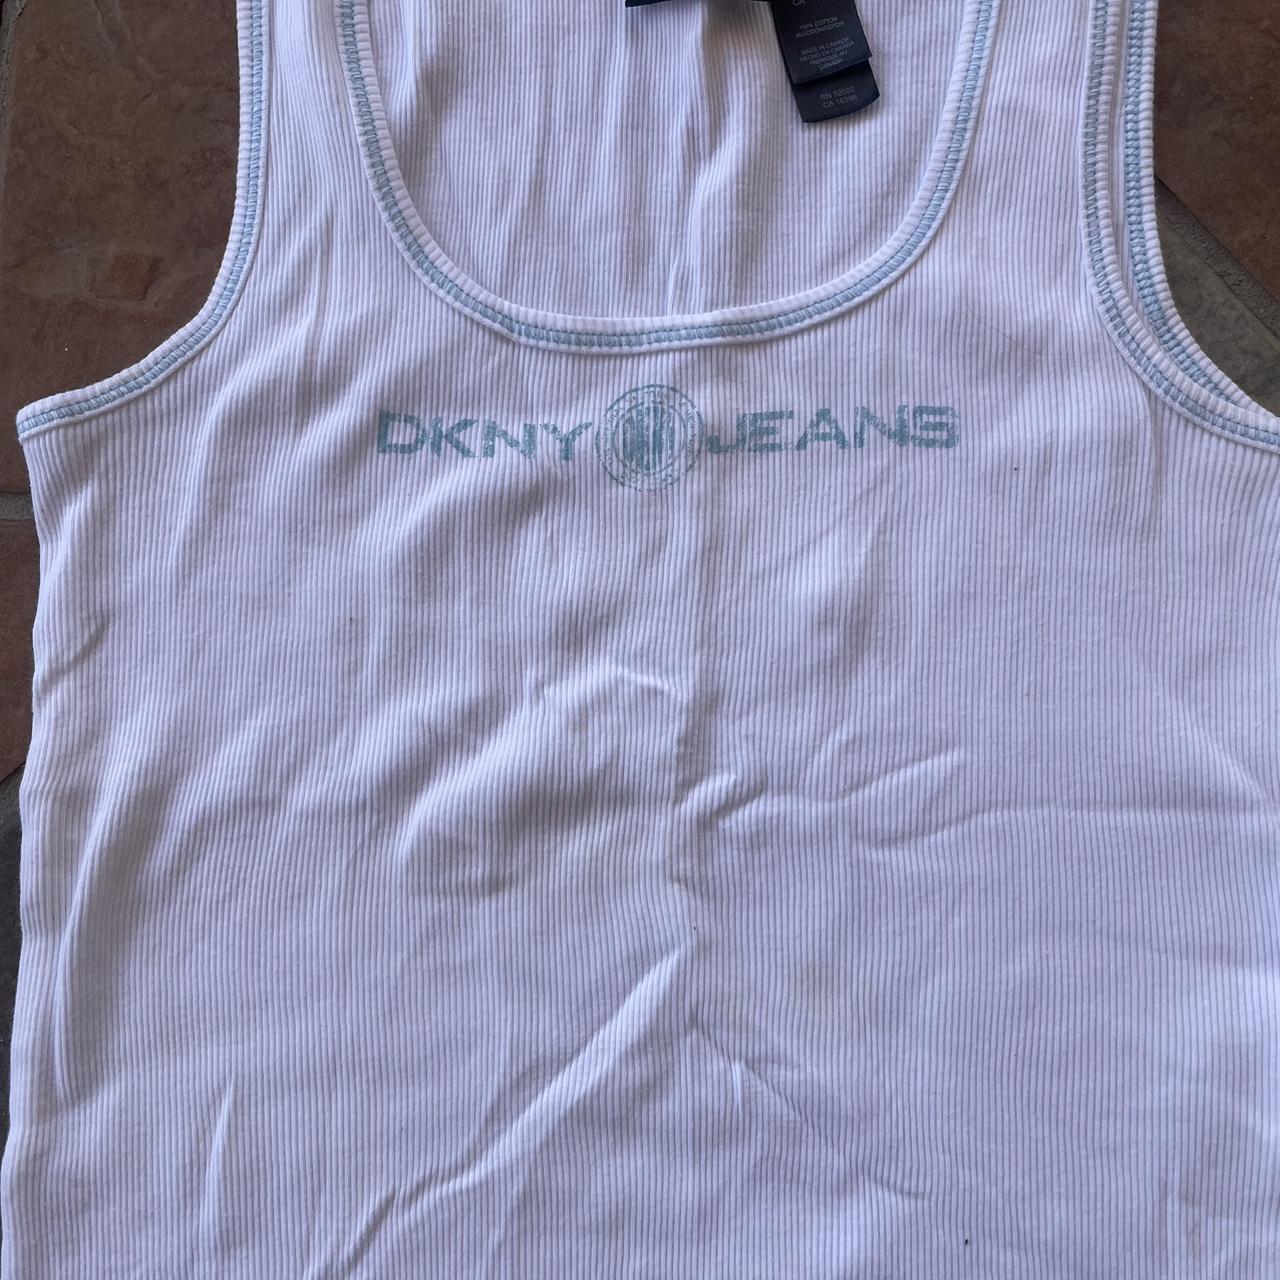 DKNY Women's White and Blue Vest (2)